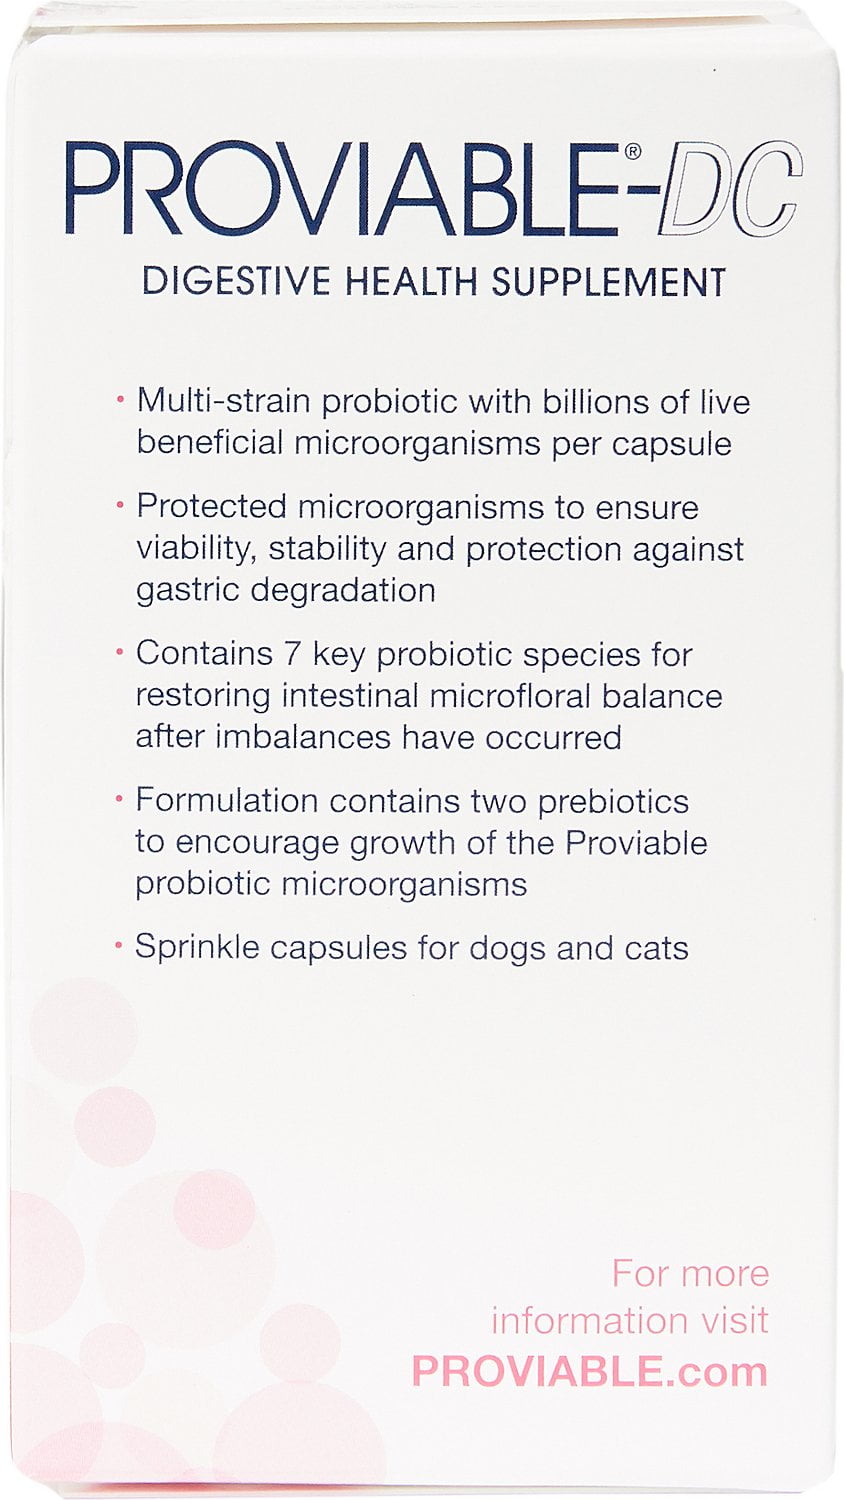 Nutramax Proviable Dc Capsules Dog Cat Supplement